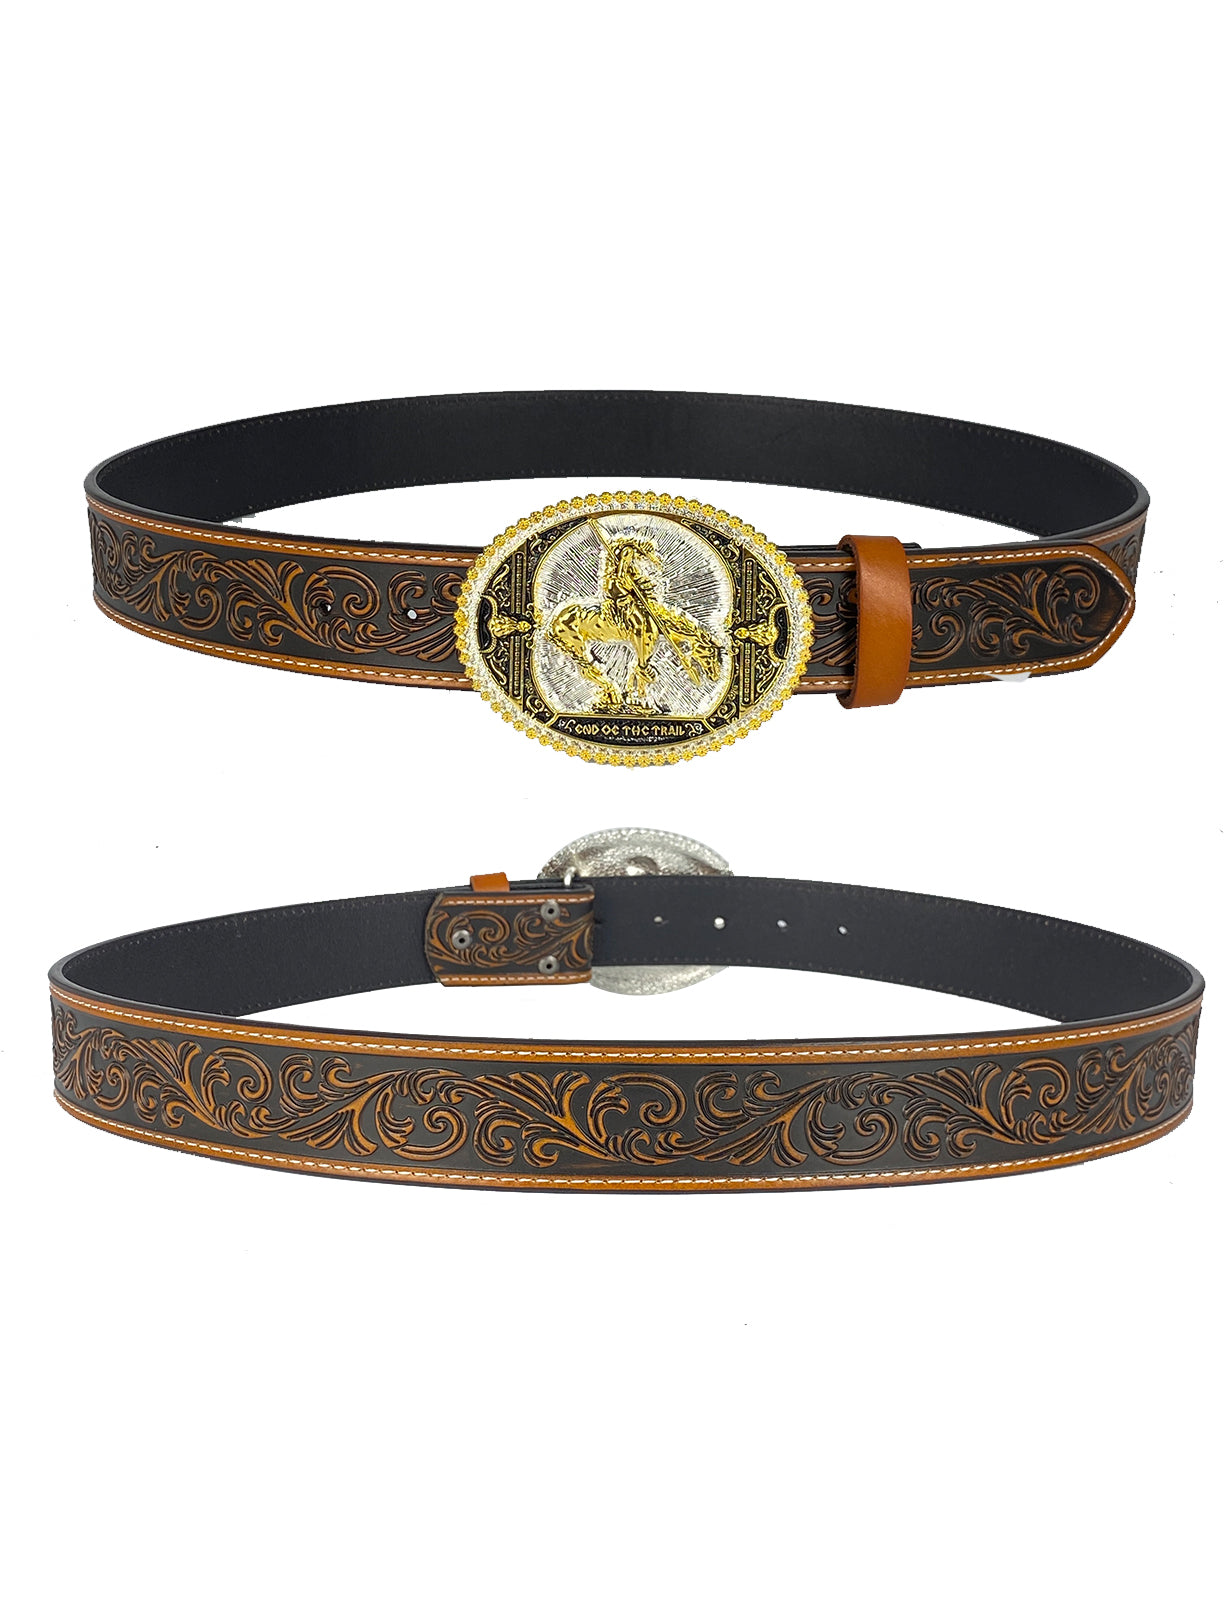 TOPACC Western Genuine Leather Pattern Tooled Belt-Southwest Collection Attitude Western Belt Buckle